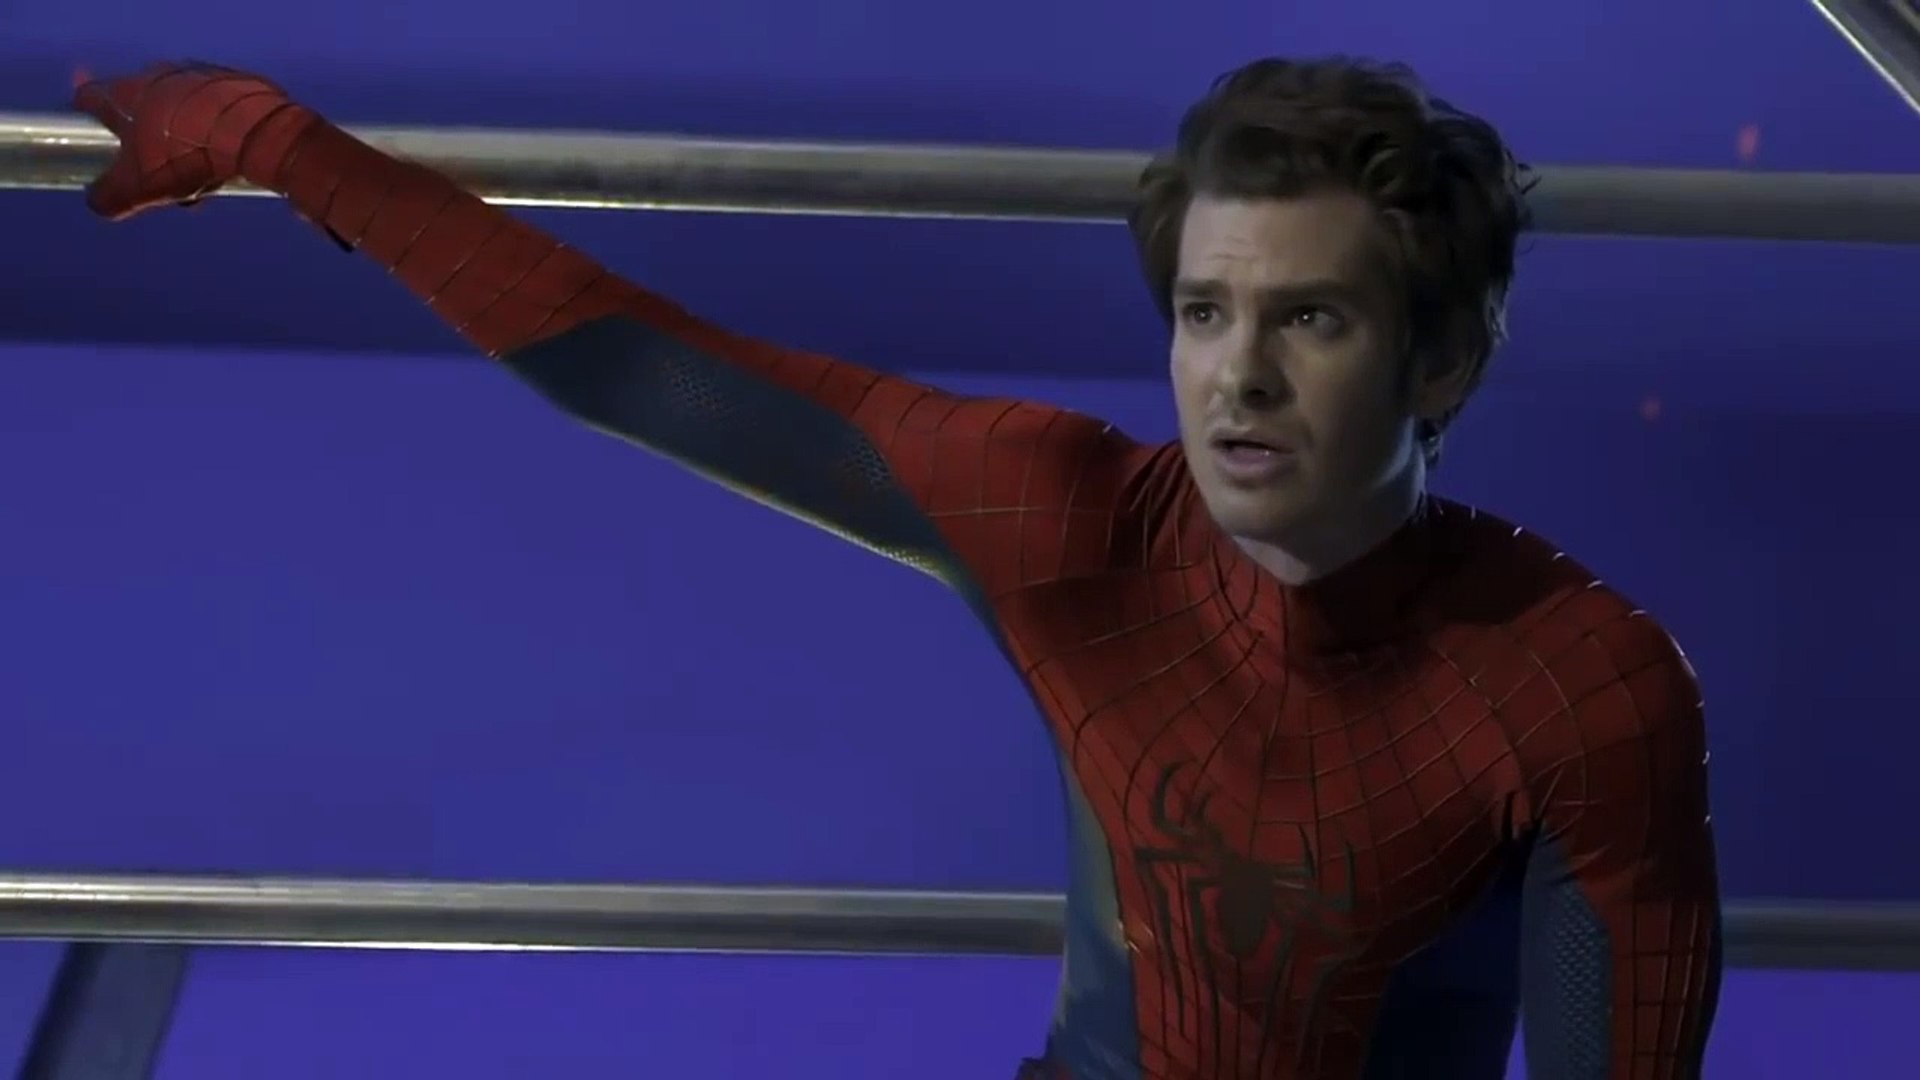 Andrew Garfield leaked video from set of Spiderman:no way home - video Dailymotion